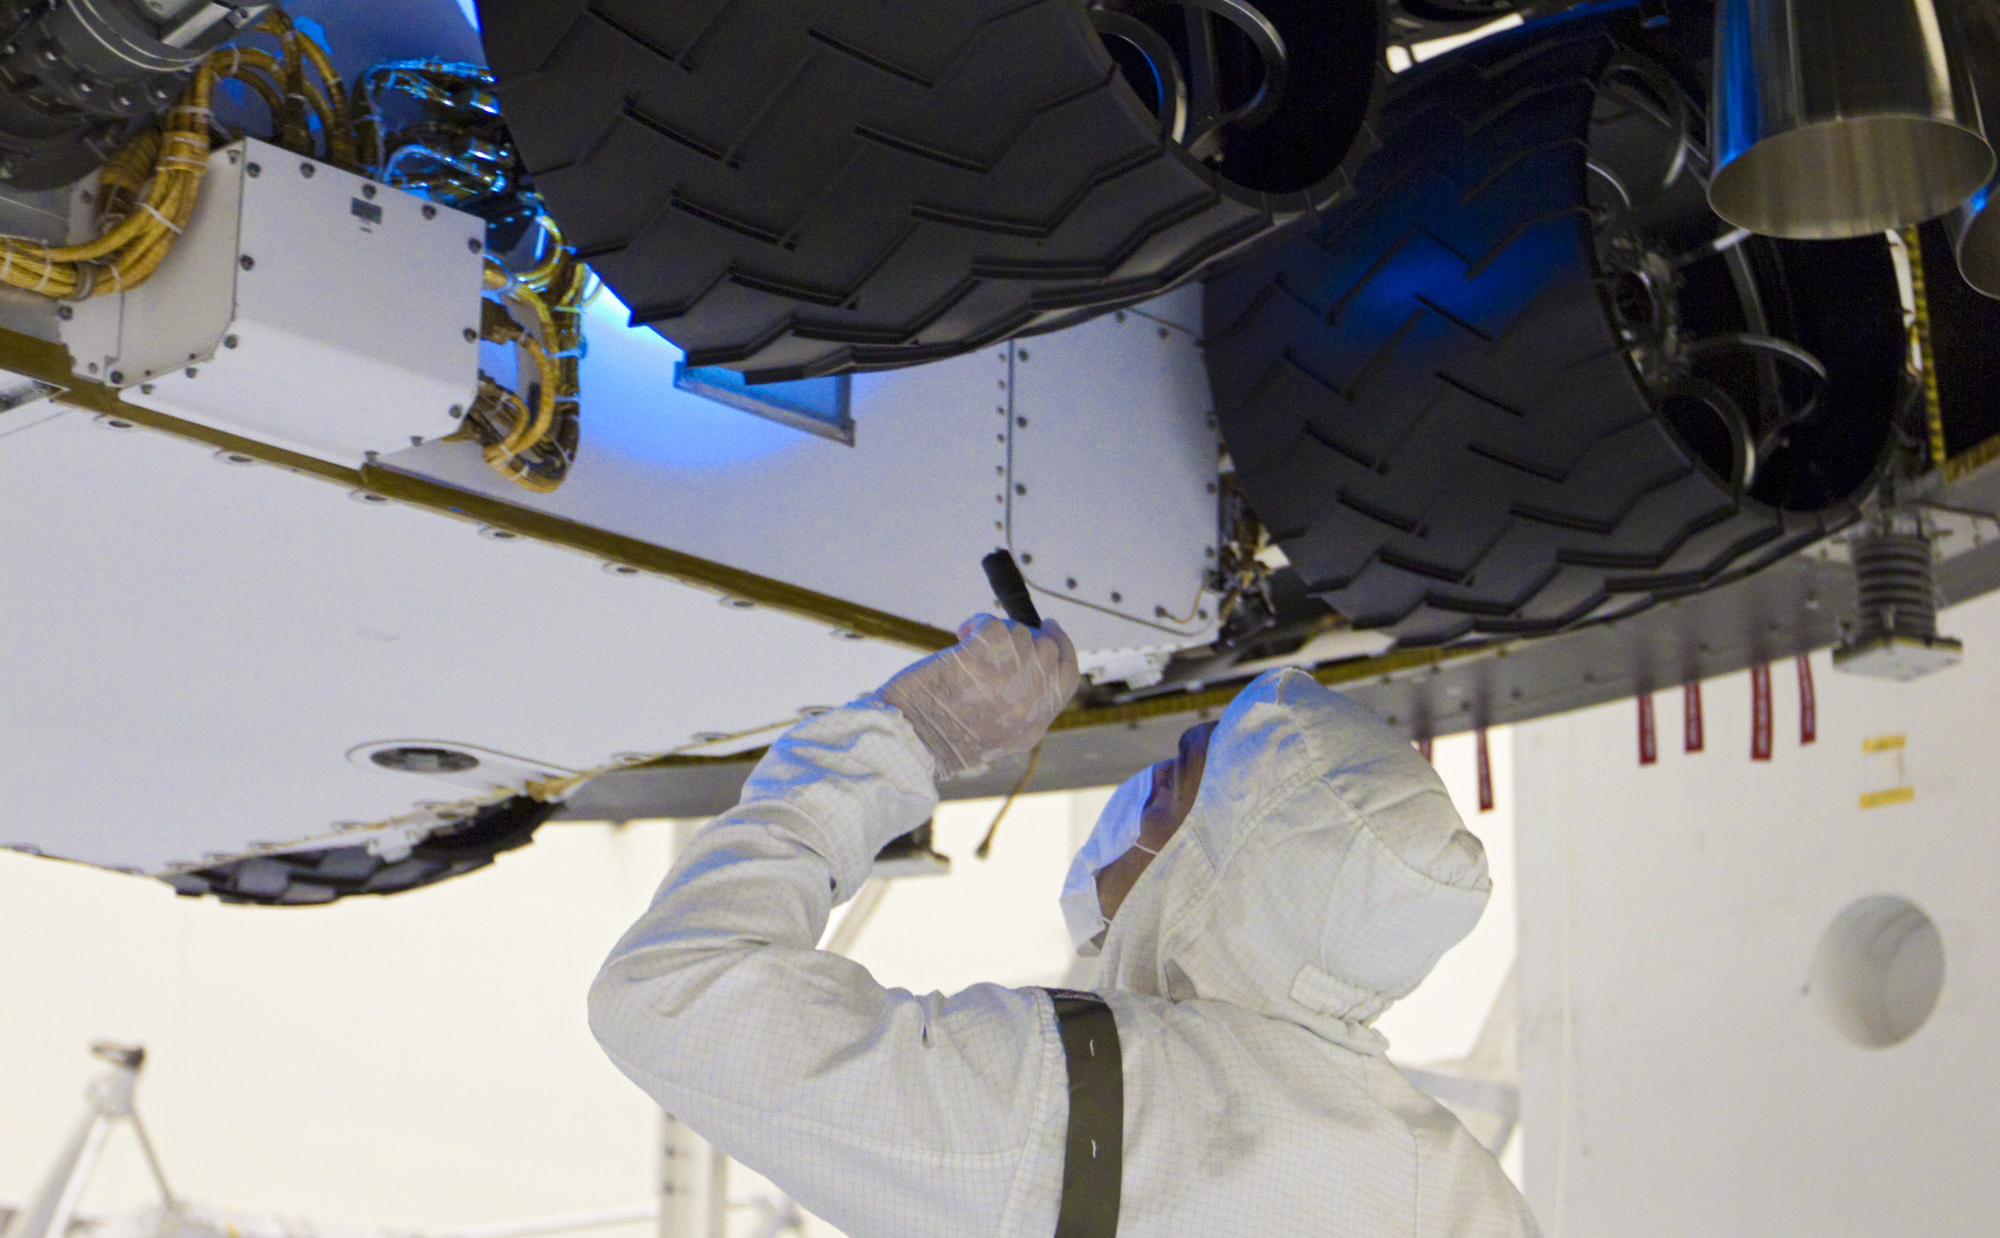 In the Payload Hazardous Servicing Facility at NASA's Kennedy Space Center in Florida, a technician inspects beneath NASA's Mars Science Laboratory (MSL) mission aeroshell, (containing the compact car-sized rover Curiosity), which has been mated to the cruise stage.